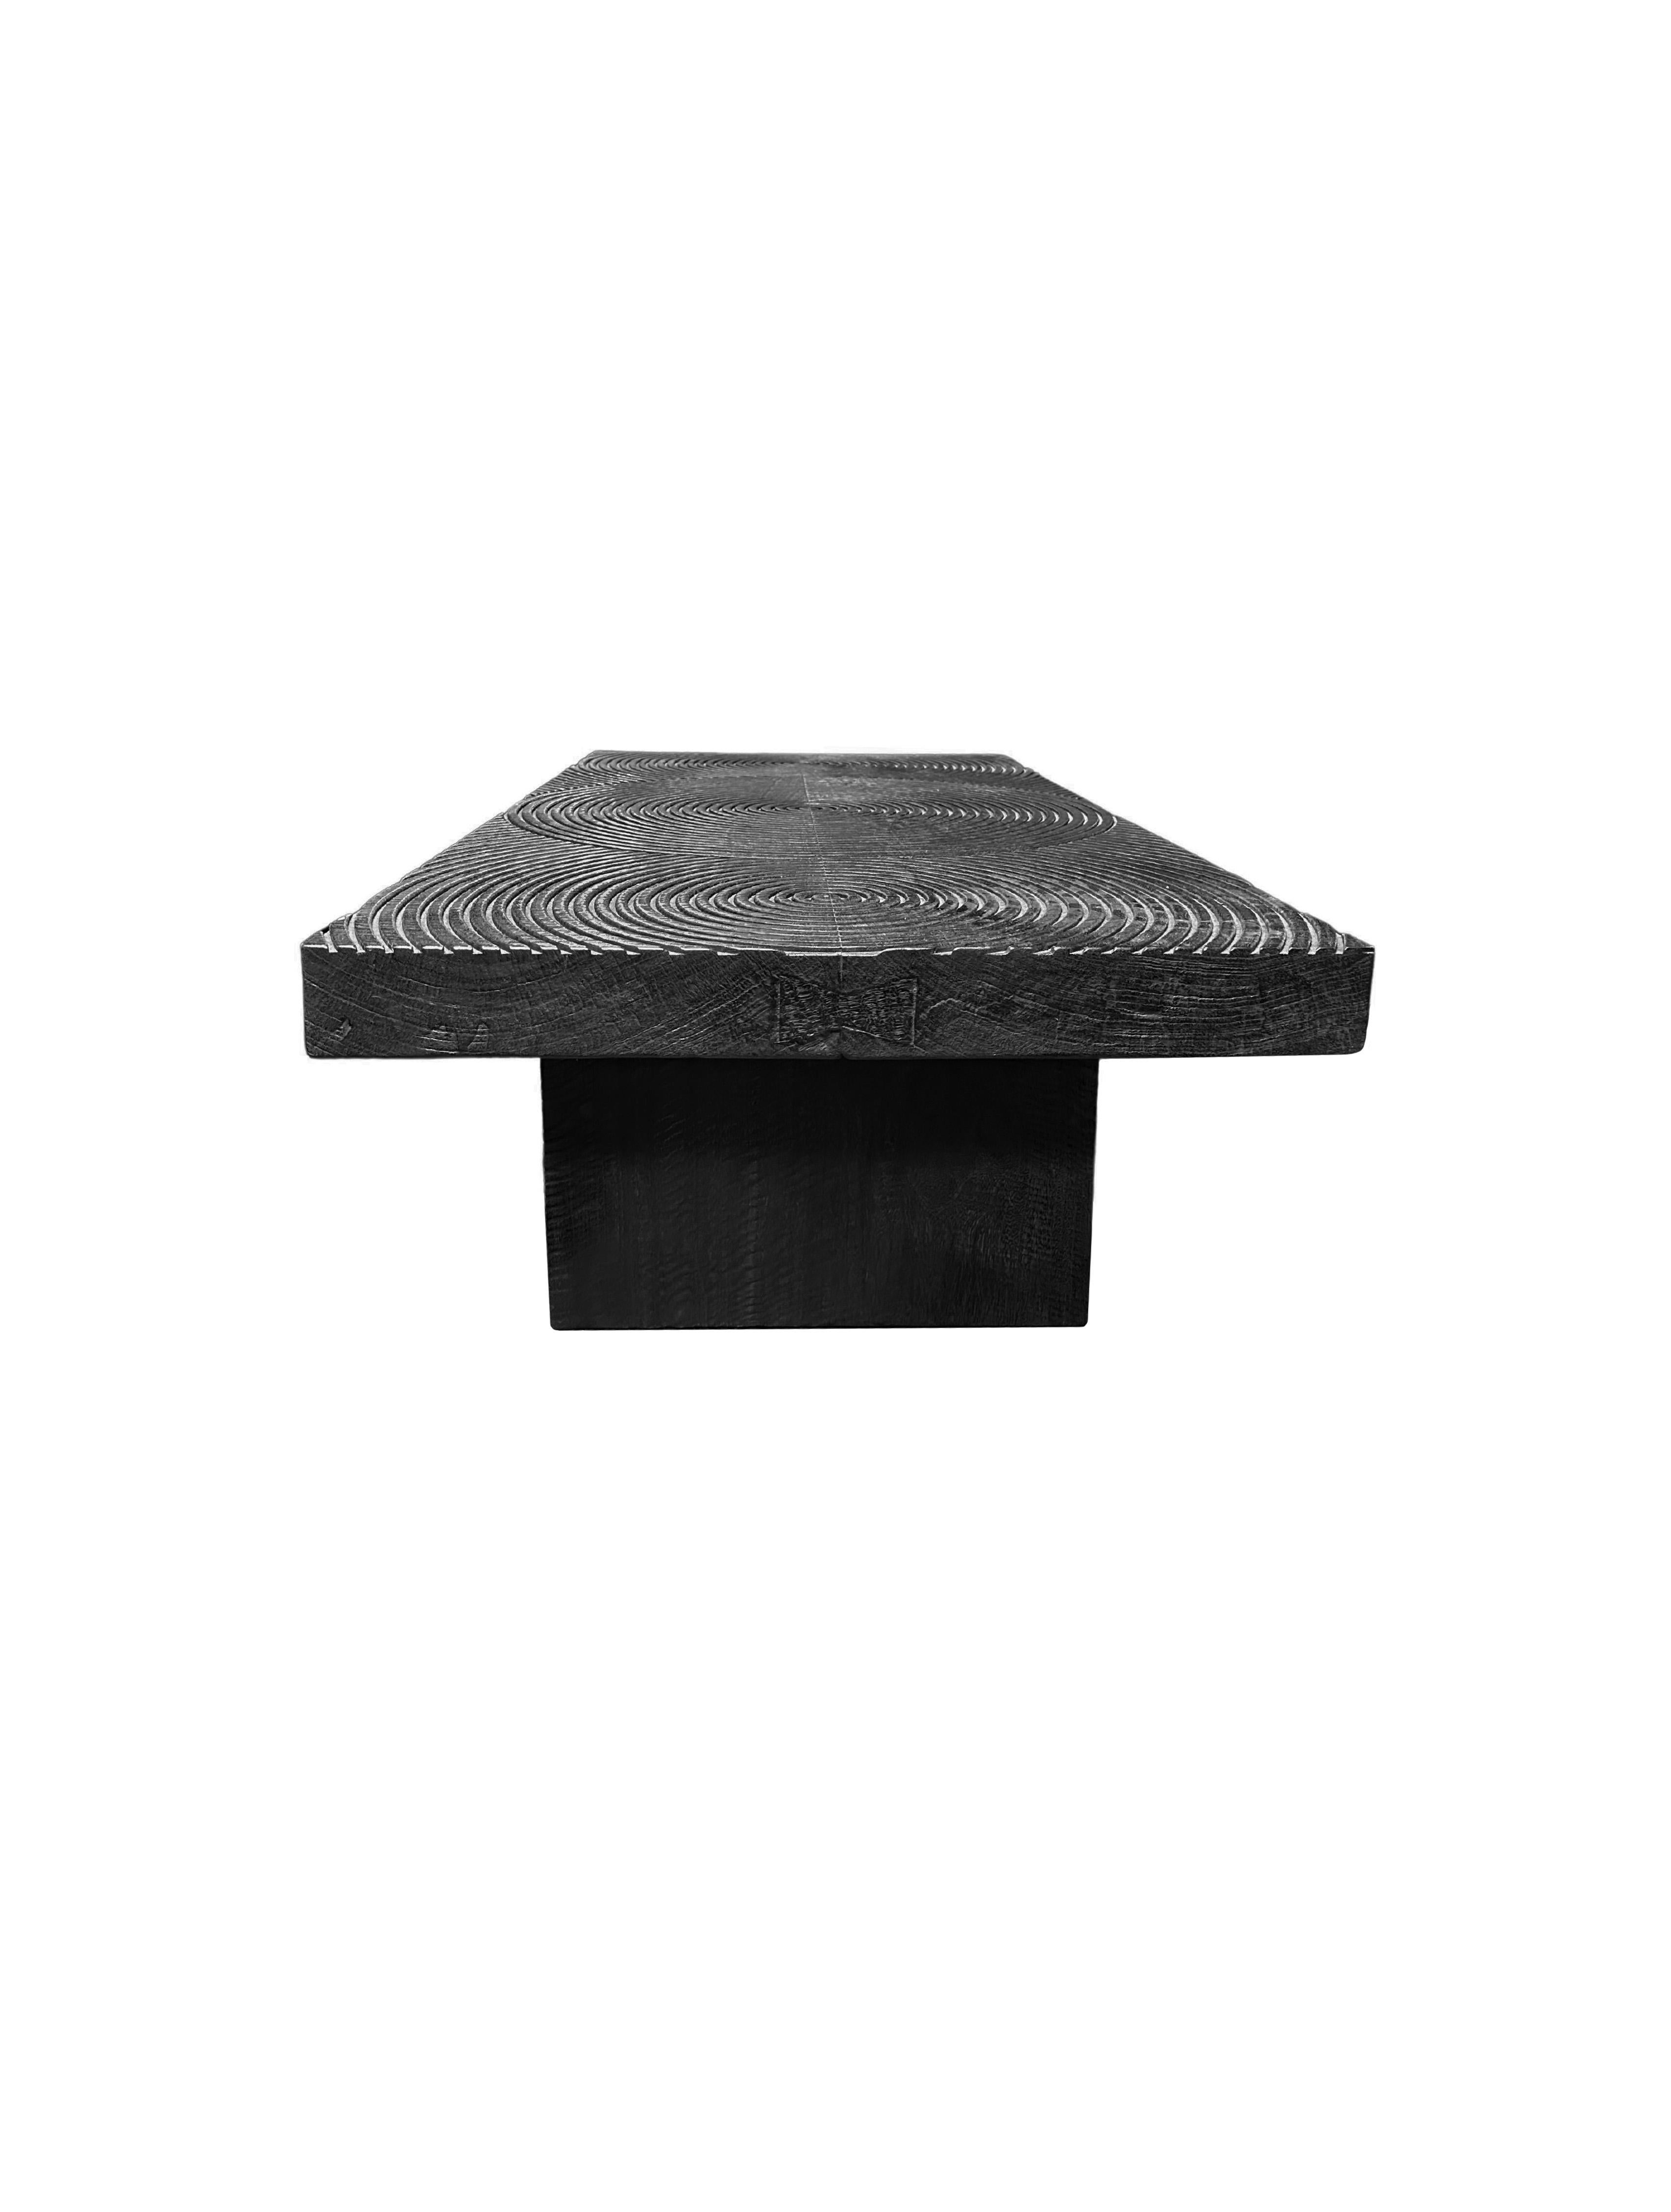 Solid Sculptural Mango Wood Table, Burnt Finish, Modern Organic For Sale 2